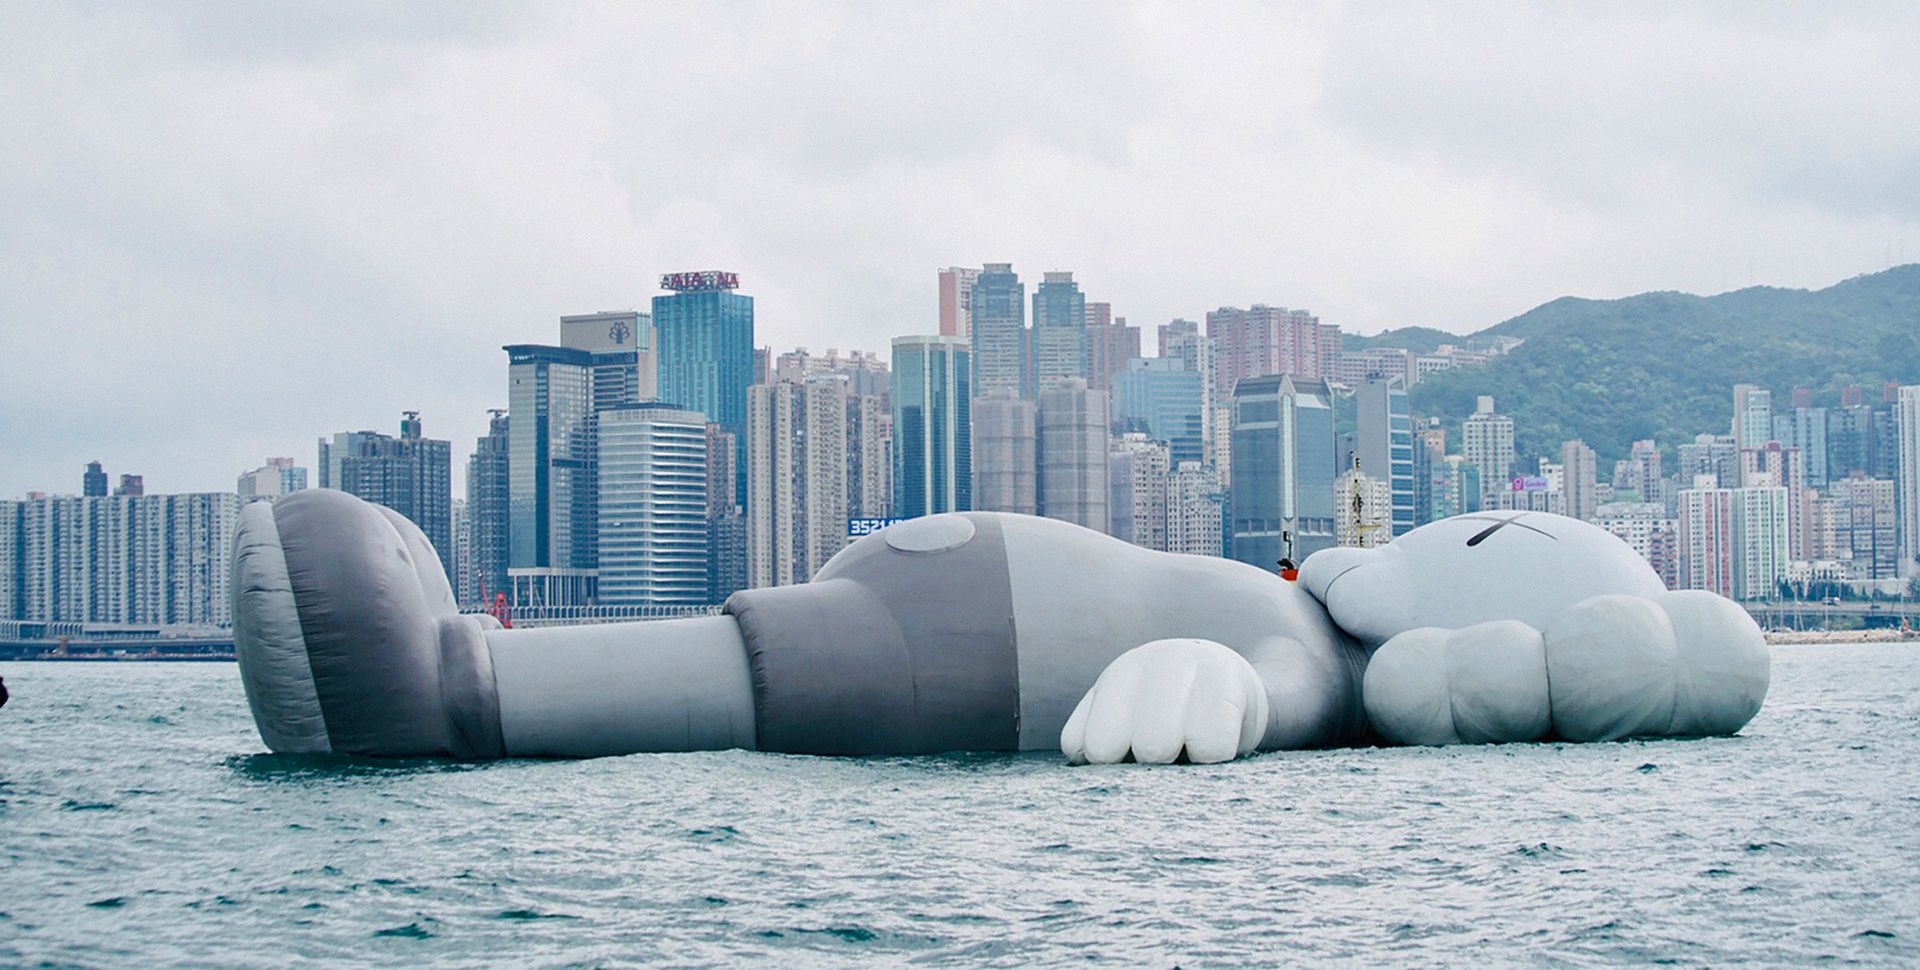 KAWS's inflatable sculpture Holiday Companion in Hong Kong's Victoria Harbour. Photo: @AllRightsReserved KAWS's inflatable sculpture Holiday Companion in Hong Kong's Victoria Harbour. Photo: @AllRightsReserved